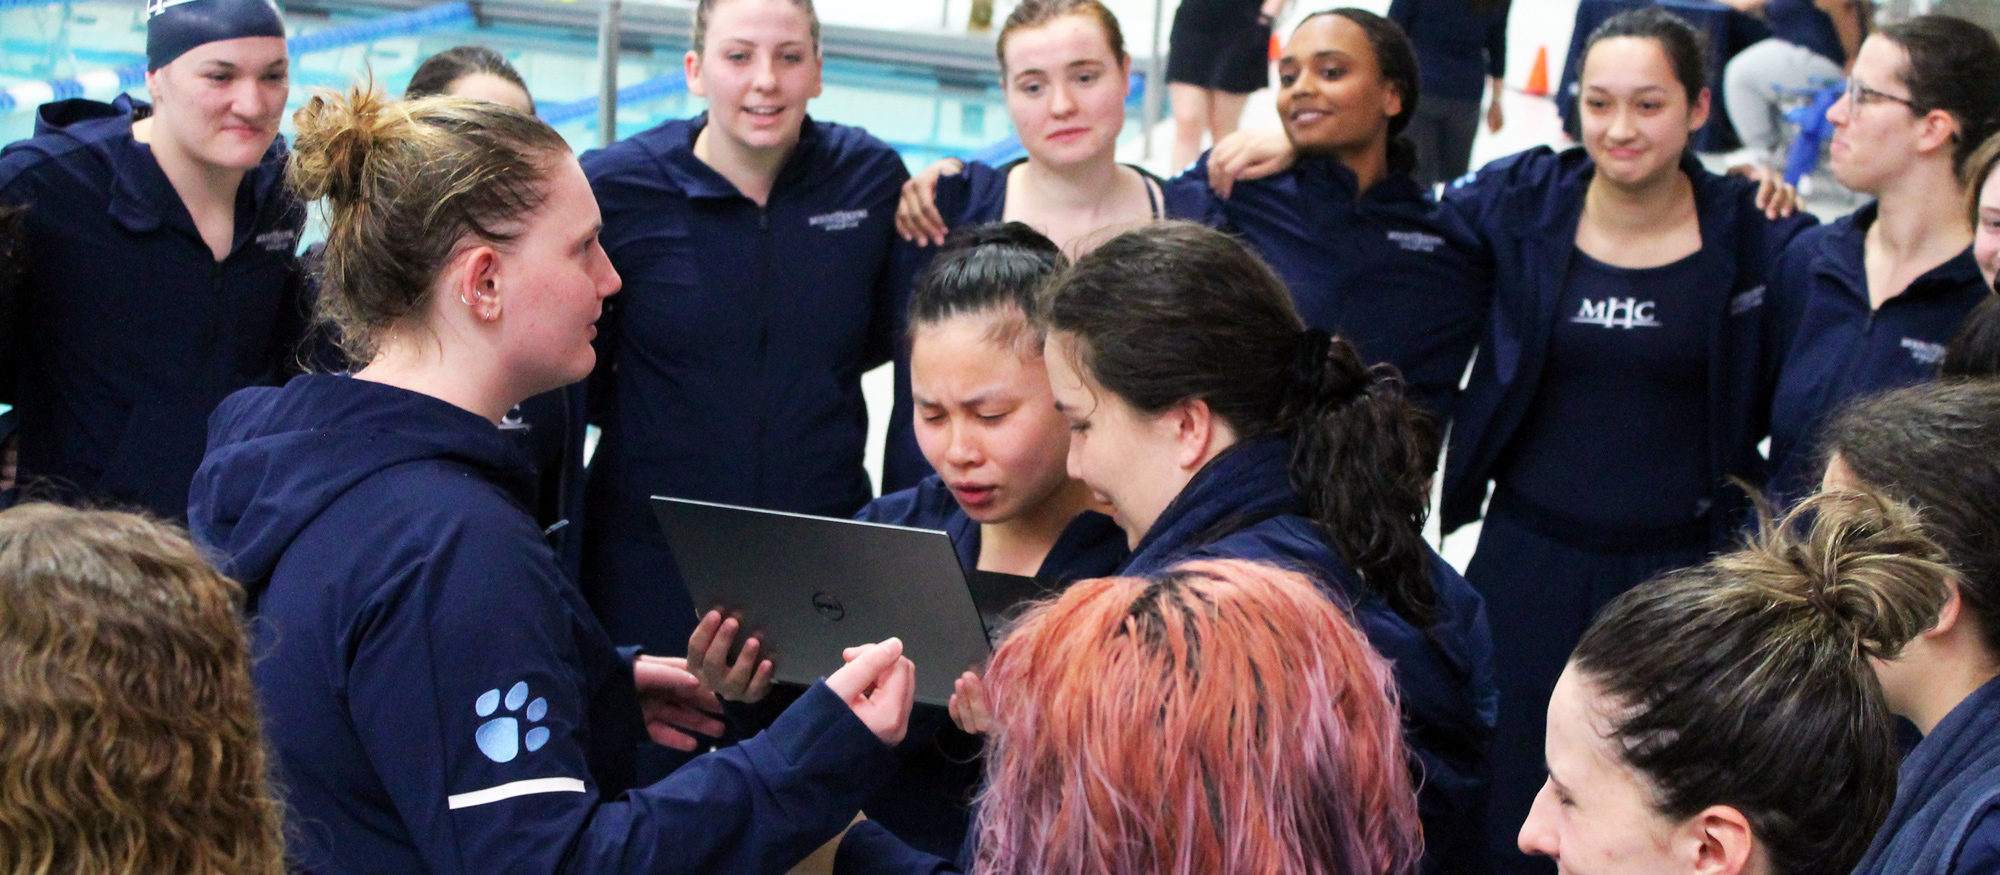 Surrounded by their teammates on Senior Day, seniors Erin Schrama and Anais Magner (center) speak remotely with senior teammate Lauren Leese via a laptop prior to Mount Holyoke's meet against Simmons University on Jan. 21, 2023.